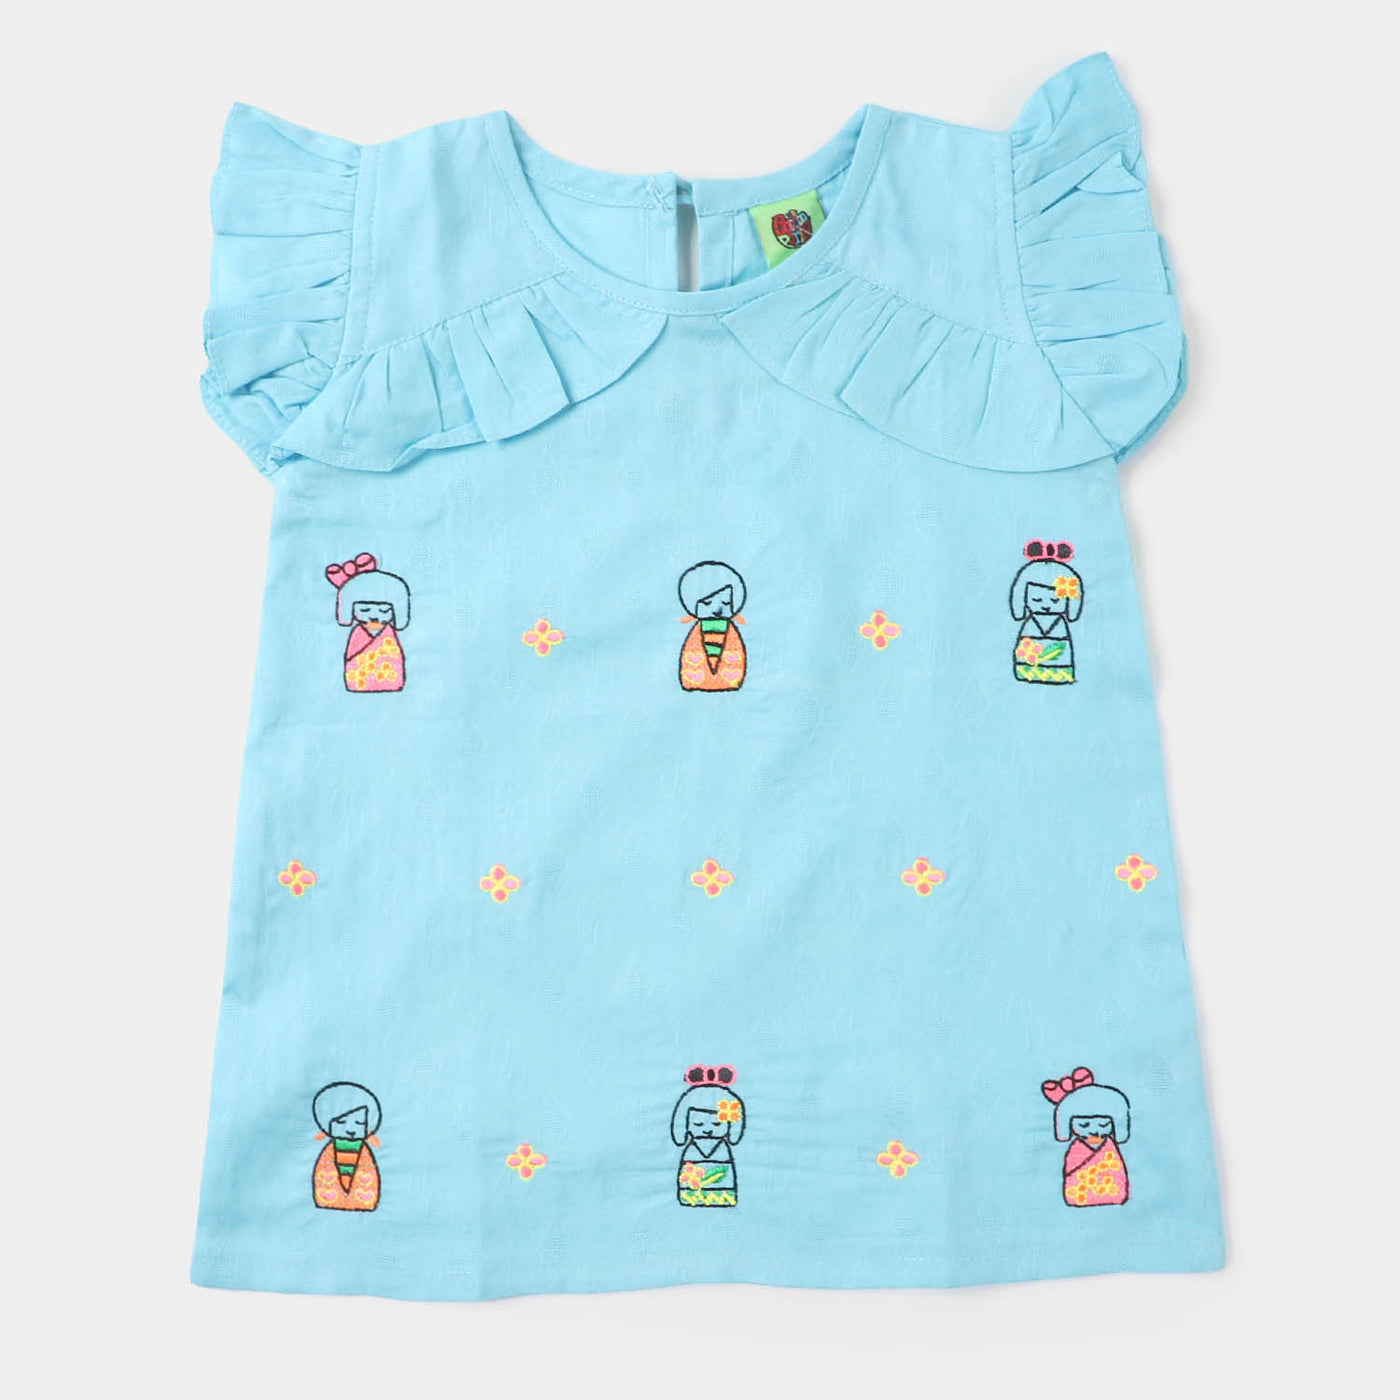 Infant Girls Jacquard Embroidered Top Chinees Doll - Light Blue